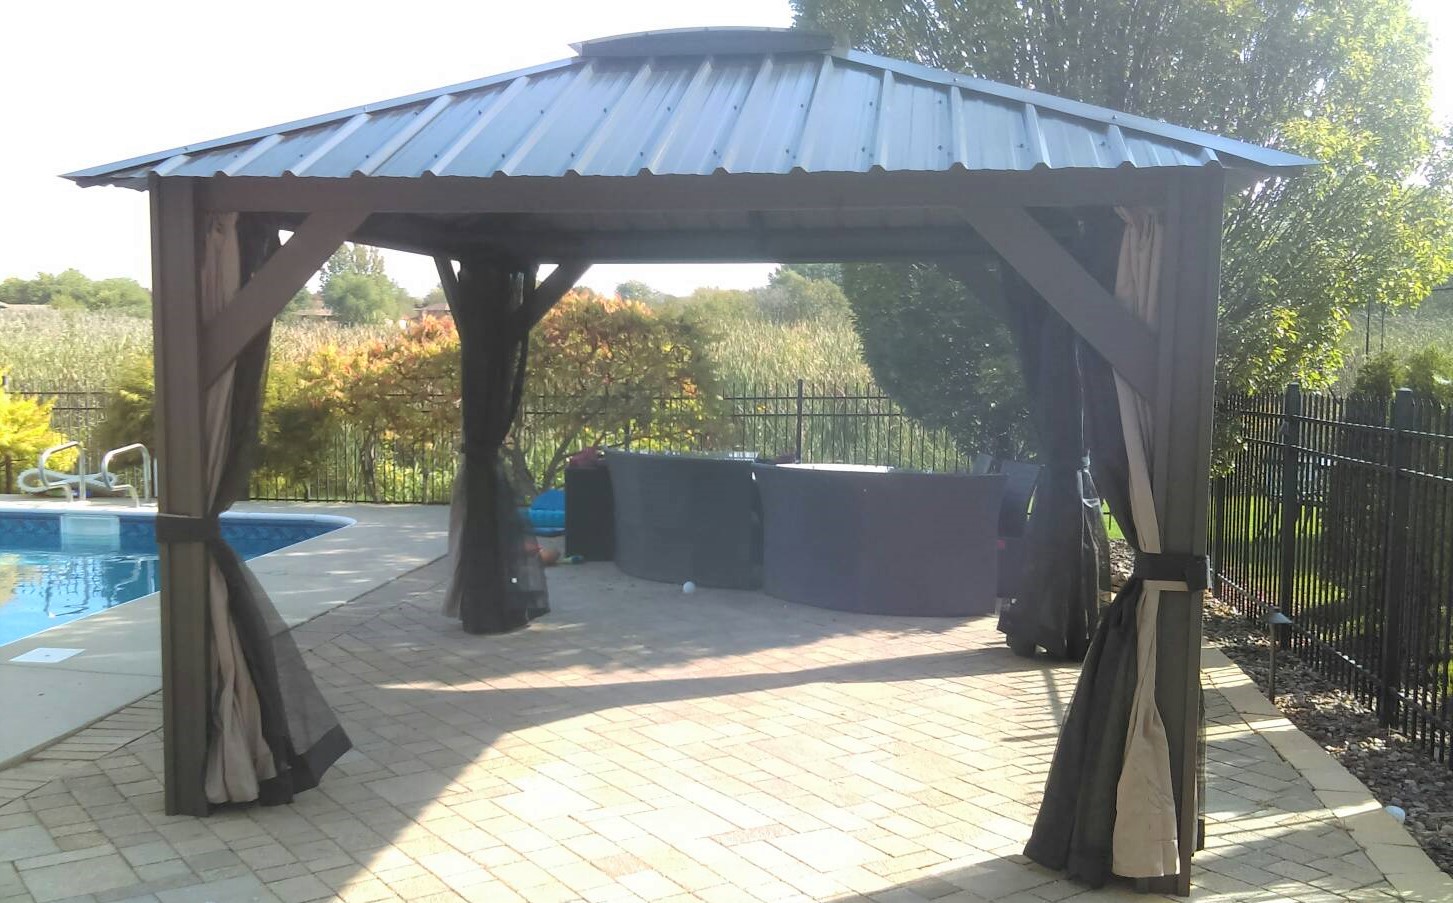 Delivery & Installation of a Visscher 11X11 "Milano" Gazebo in Orland Park, IL! - Transmotion